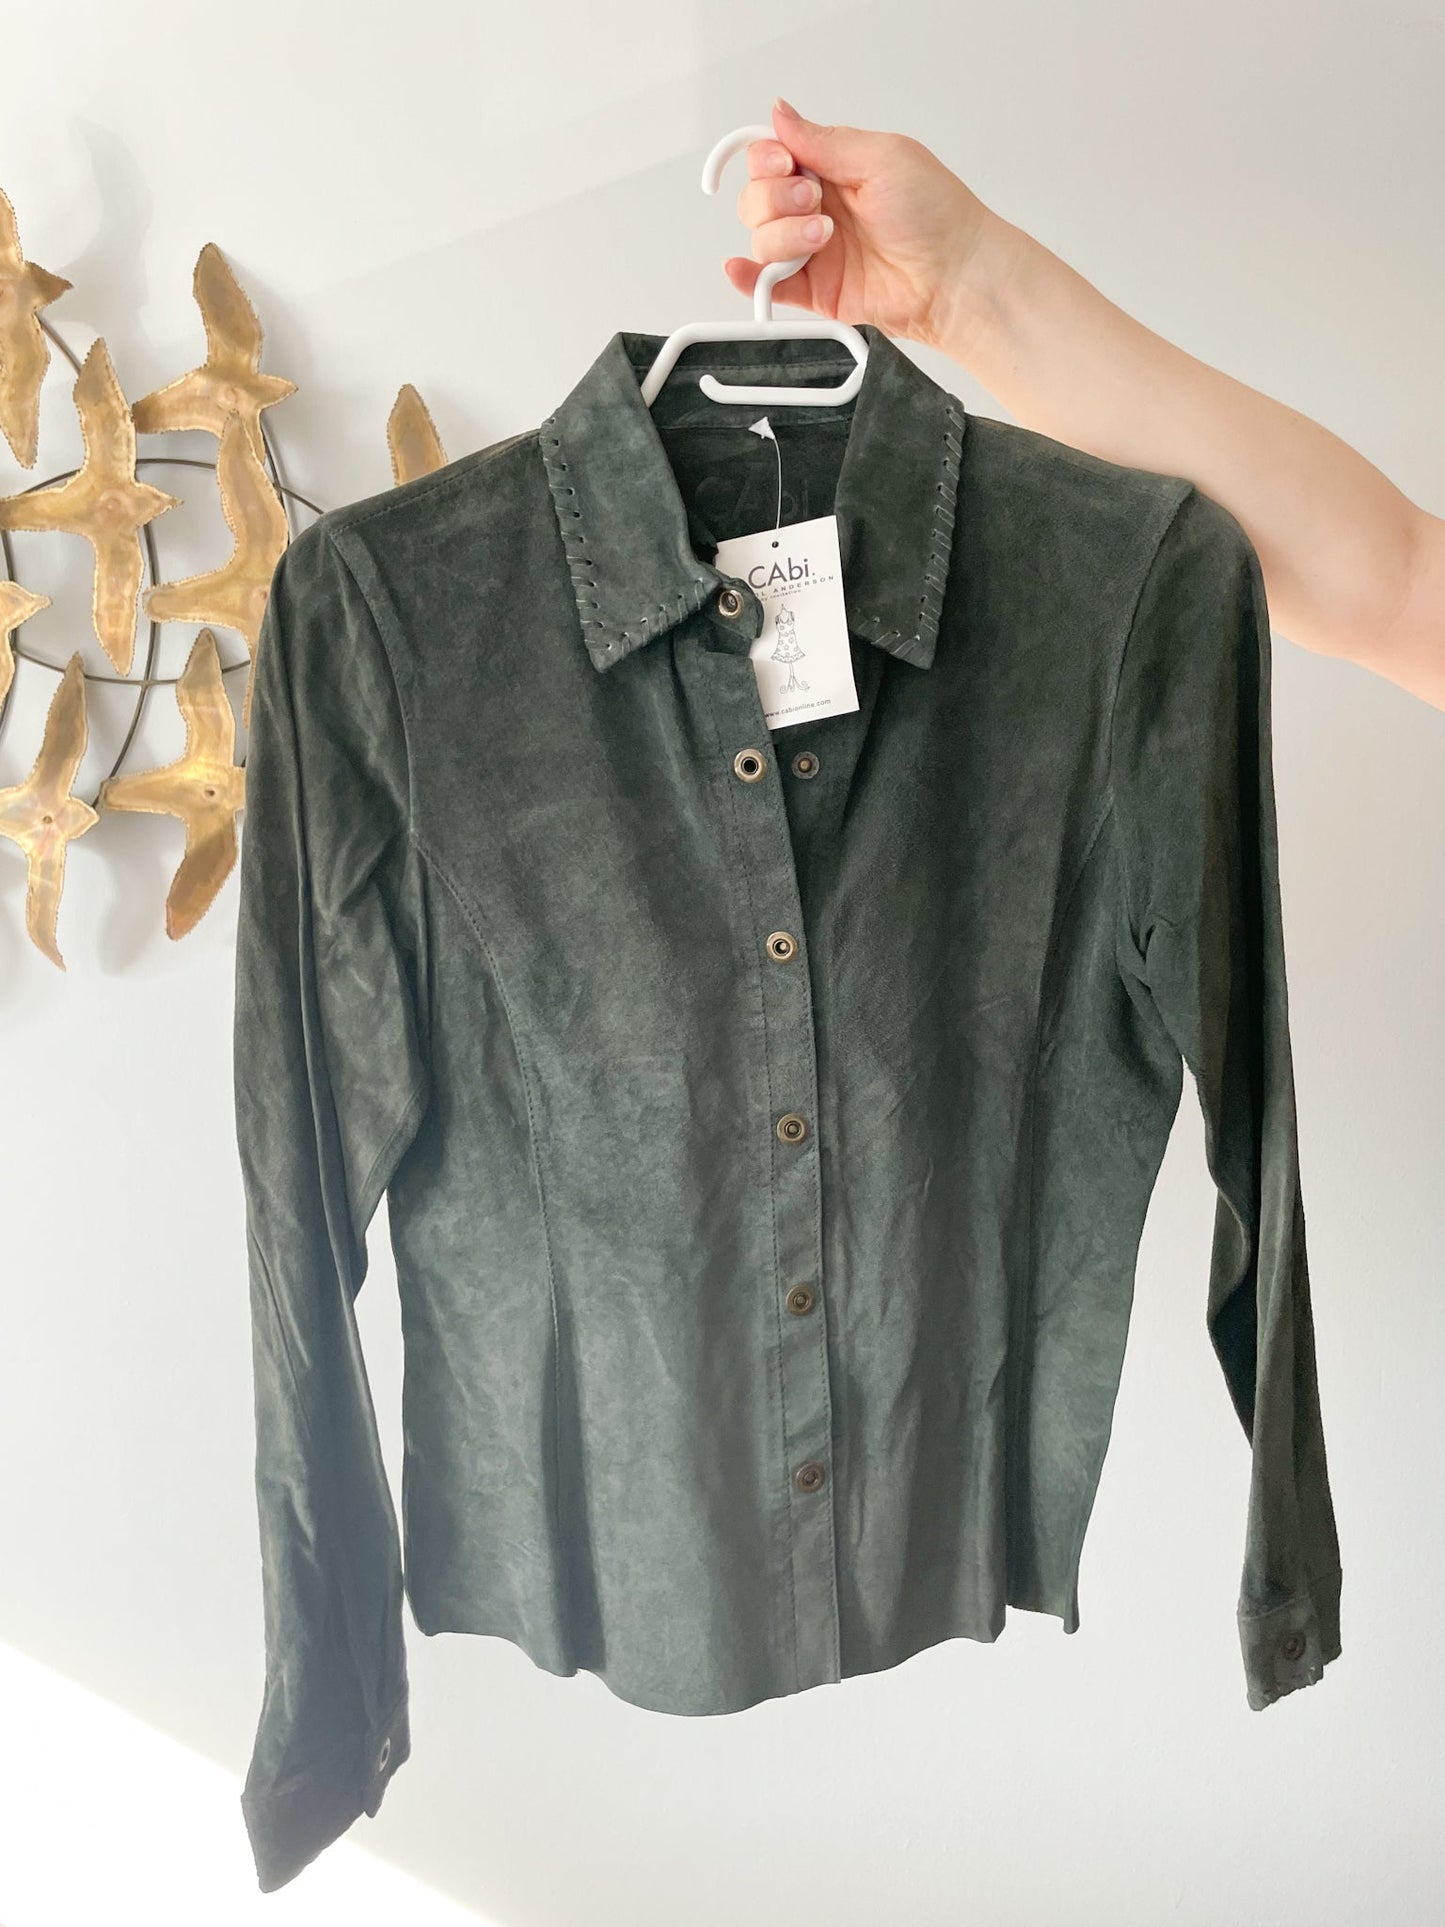 Cabi Olive Green Genuine Suede Leather Button Down Shirt NWT - XS